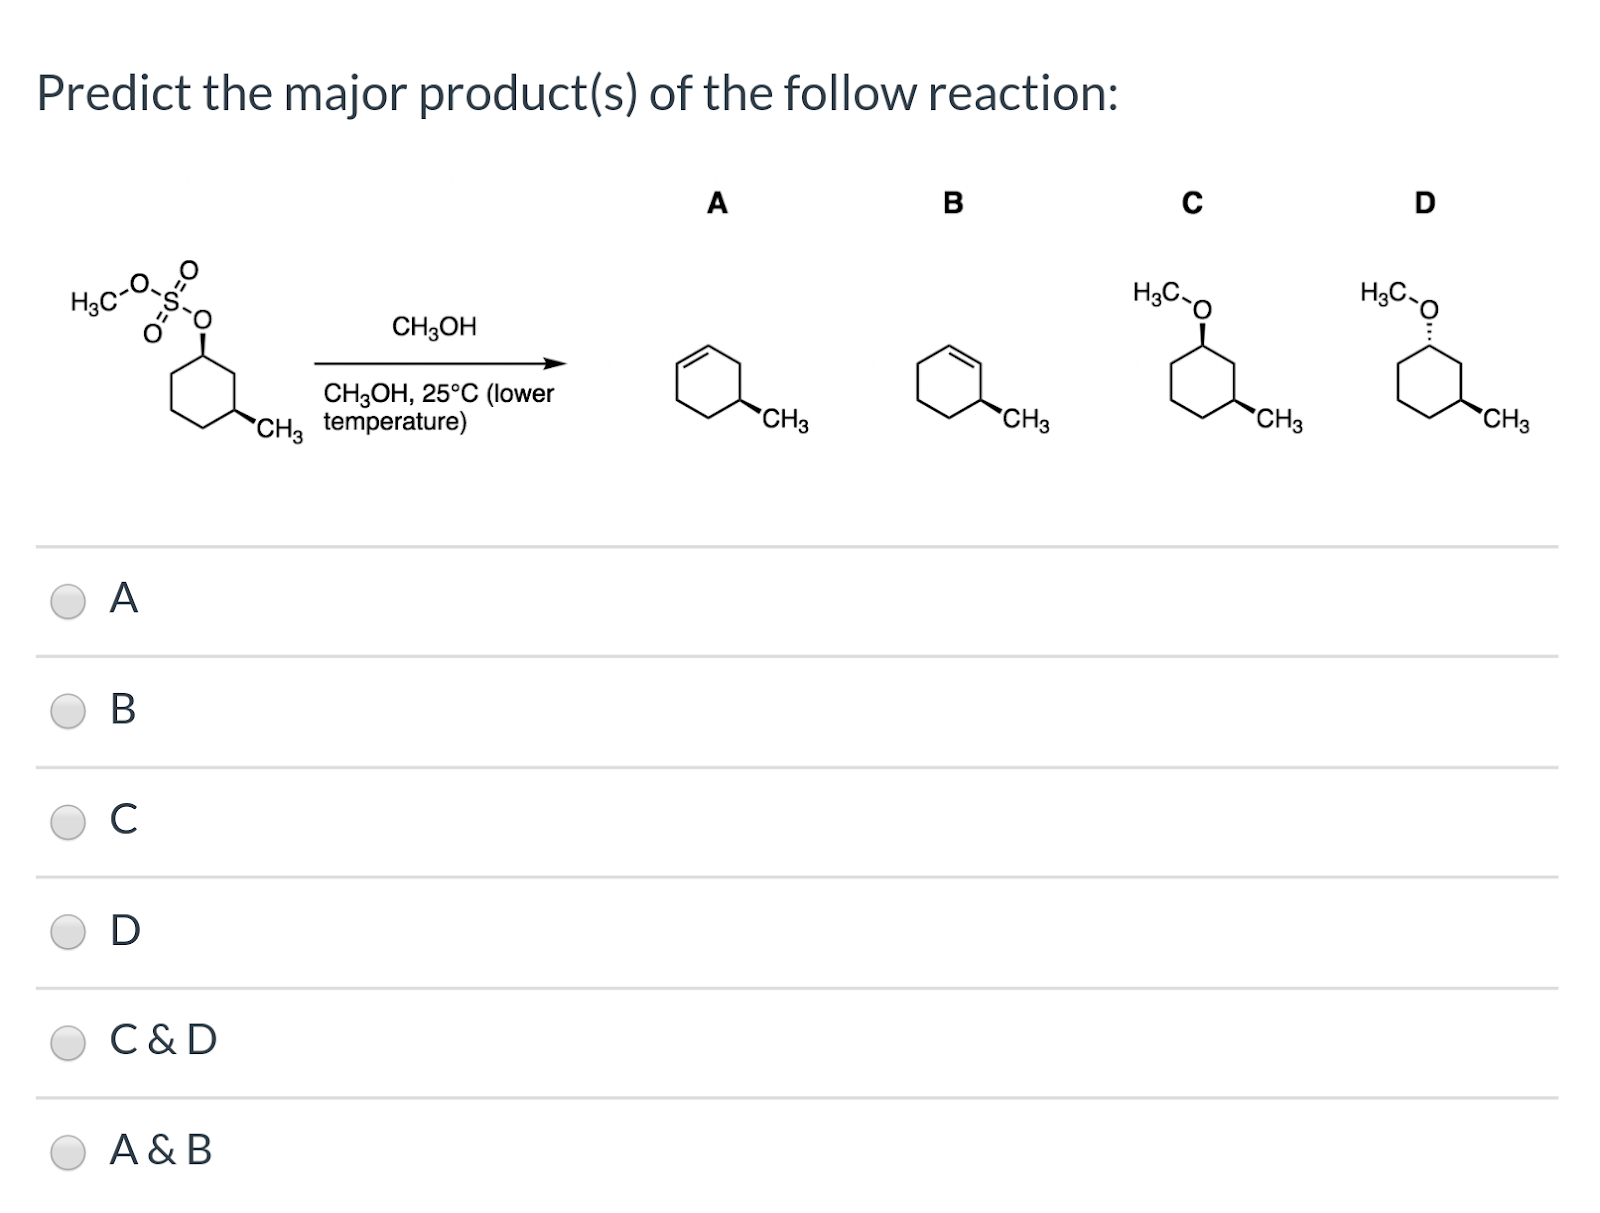 Predict the major product(s) of the follow reaction: D с в HsC-o HаСо CH3OH CHзОН, 25°С (lower CH3 temperature) CHз CHз CH